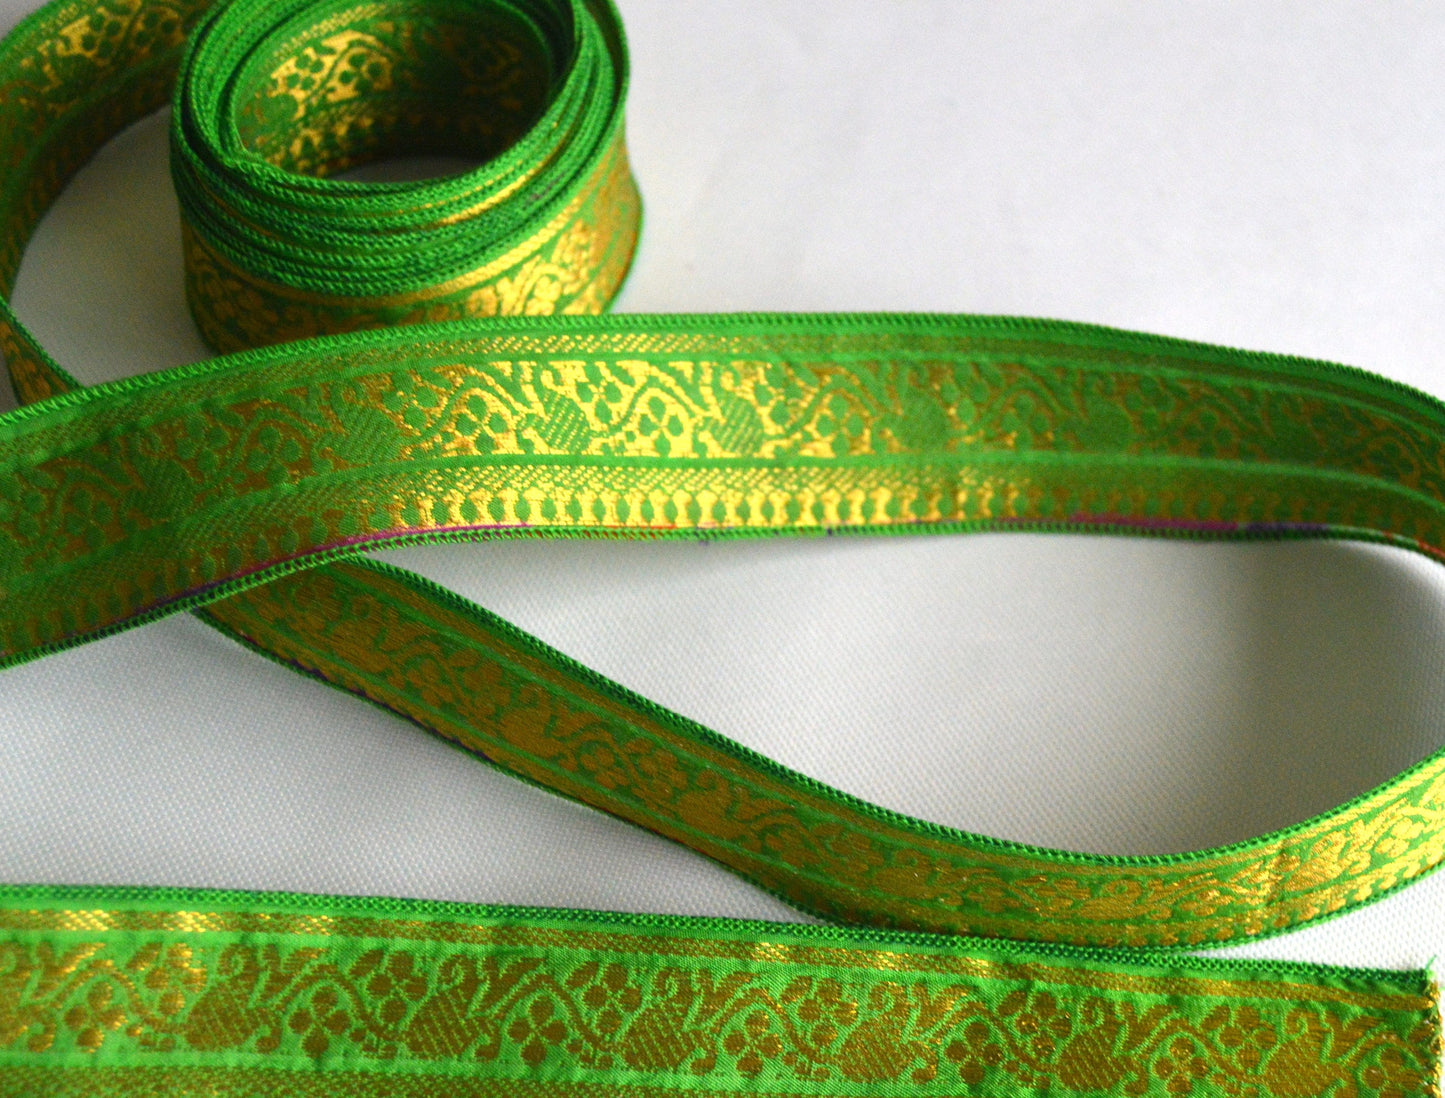 Lime & Gold Pure Silk Vintage Recycled Upcycled Sari Silk Ribbon